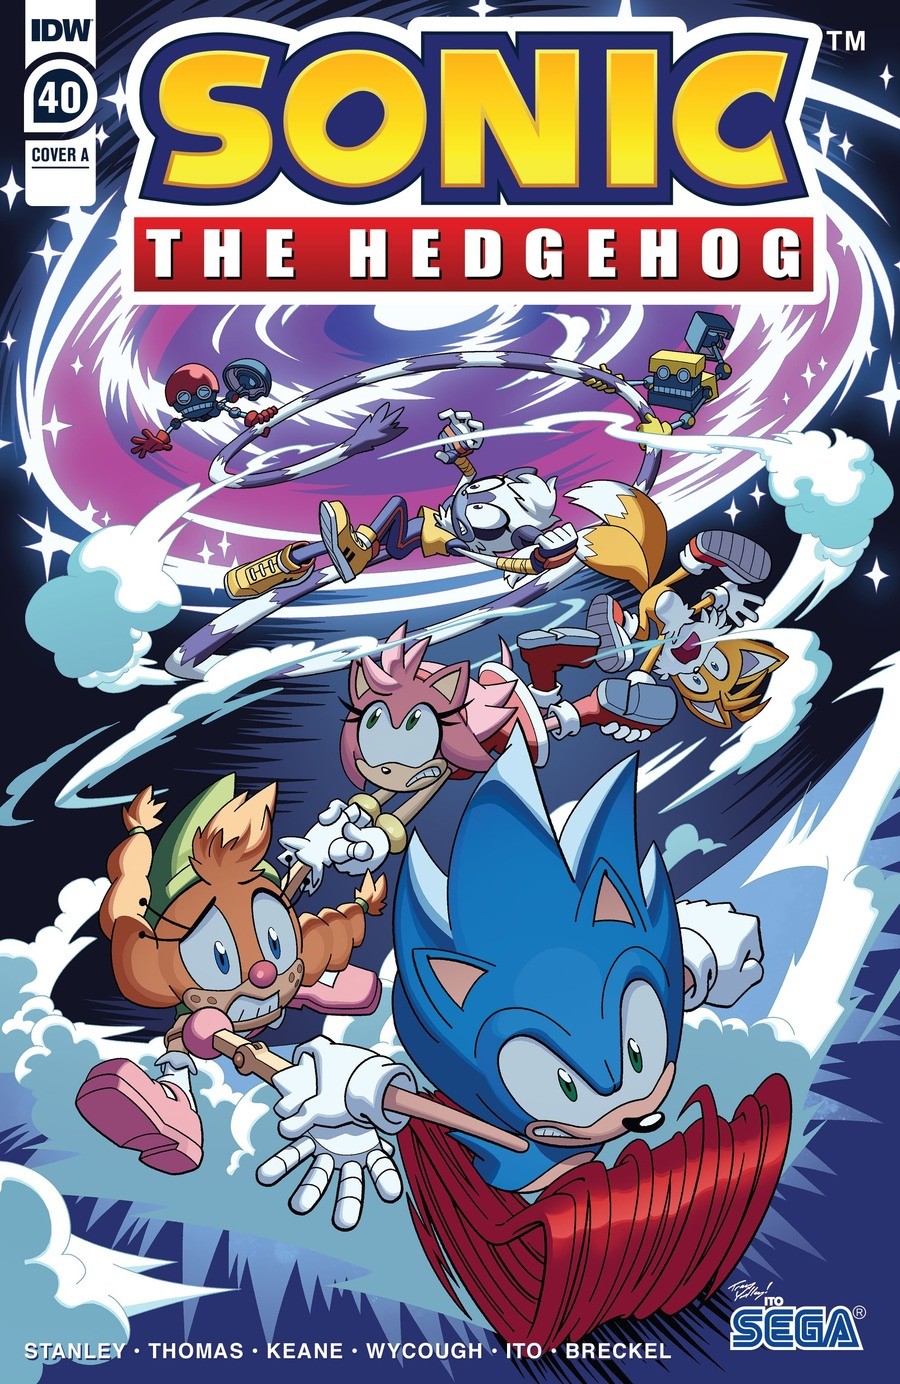 Sonic IDW #40. join list: SonicIDW (93 subs)Mention History And we're back baby! They seemed to work hard on gettin this one out a bit faster than normal since 